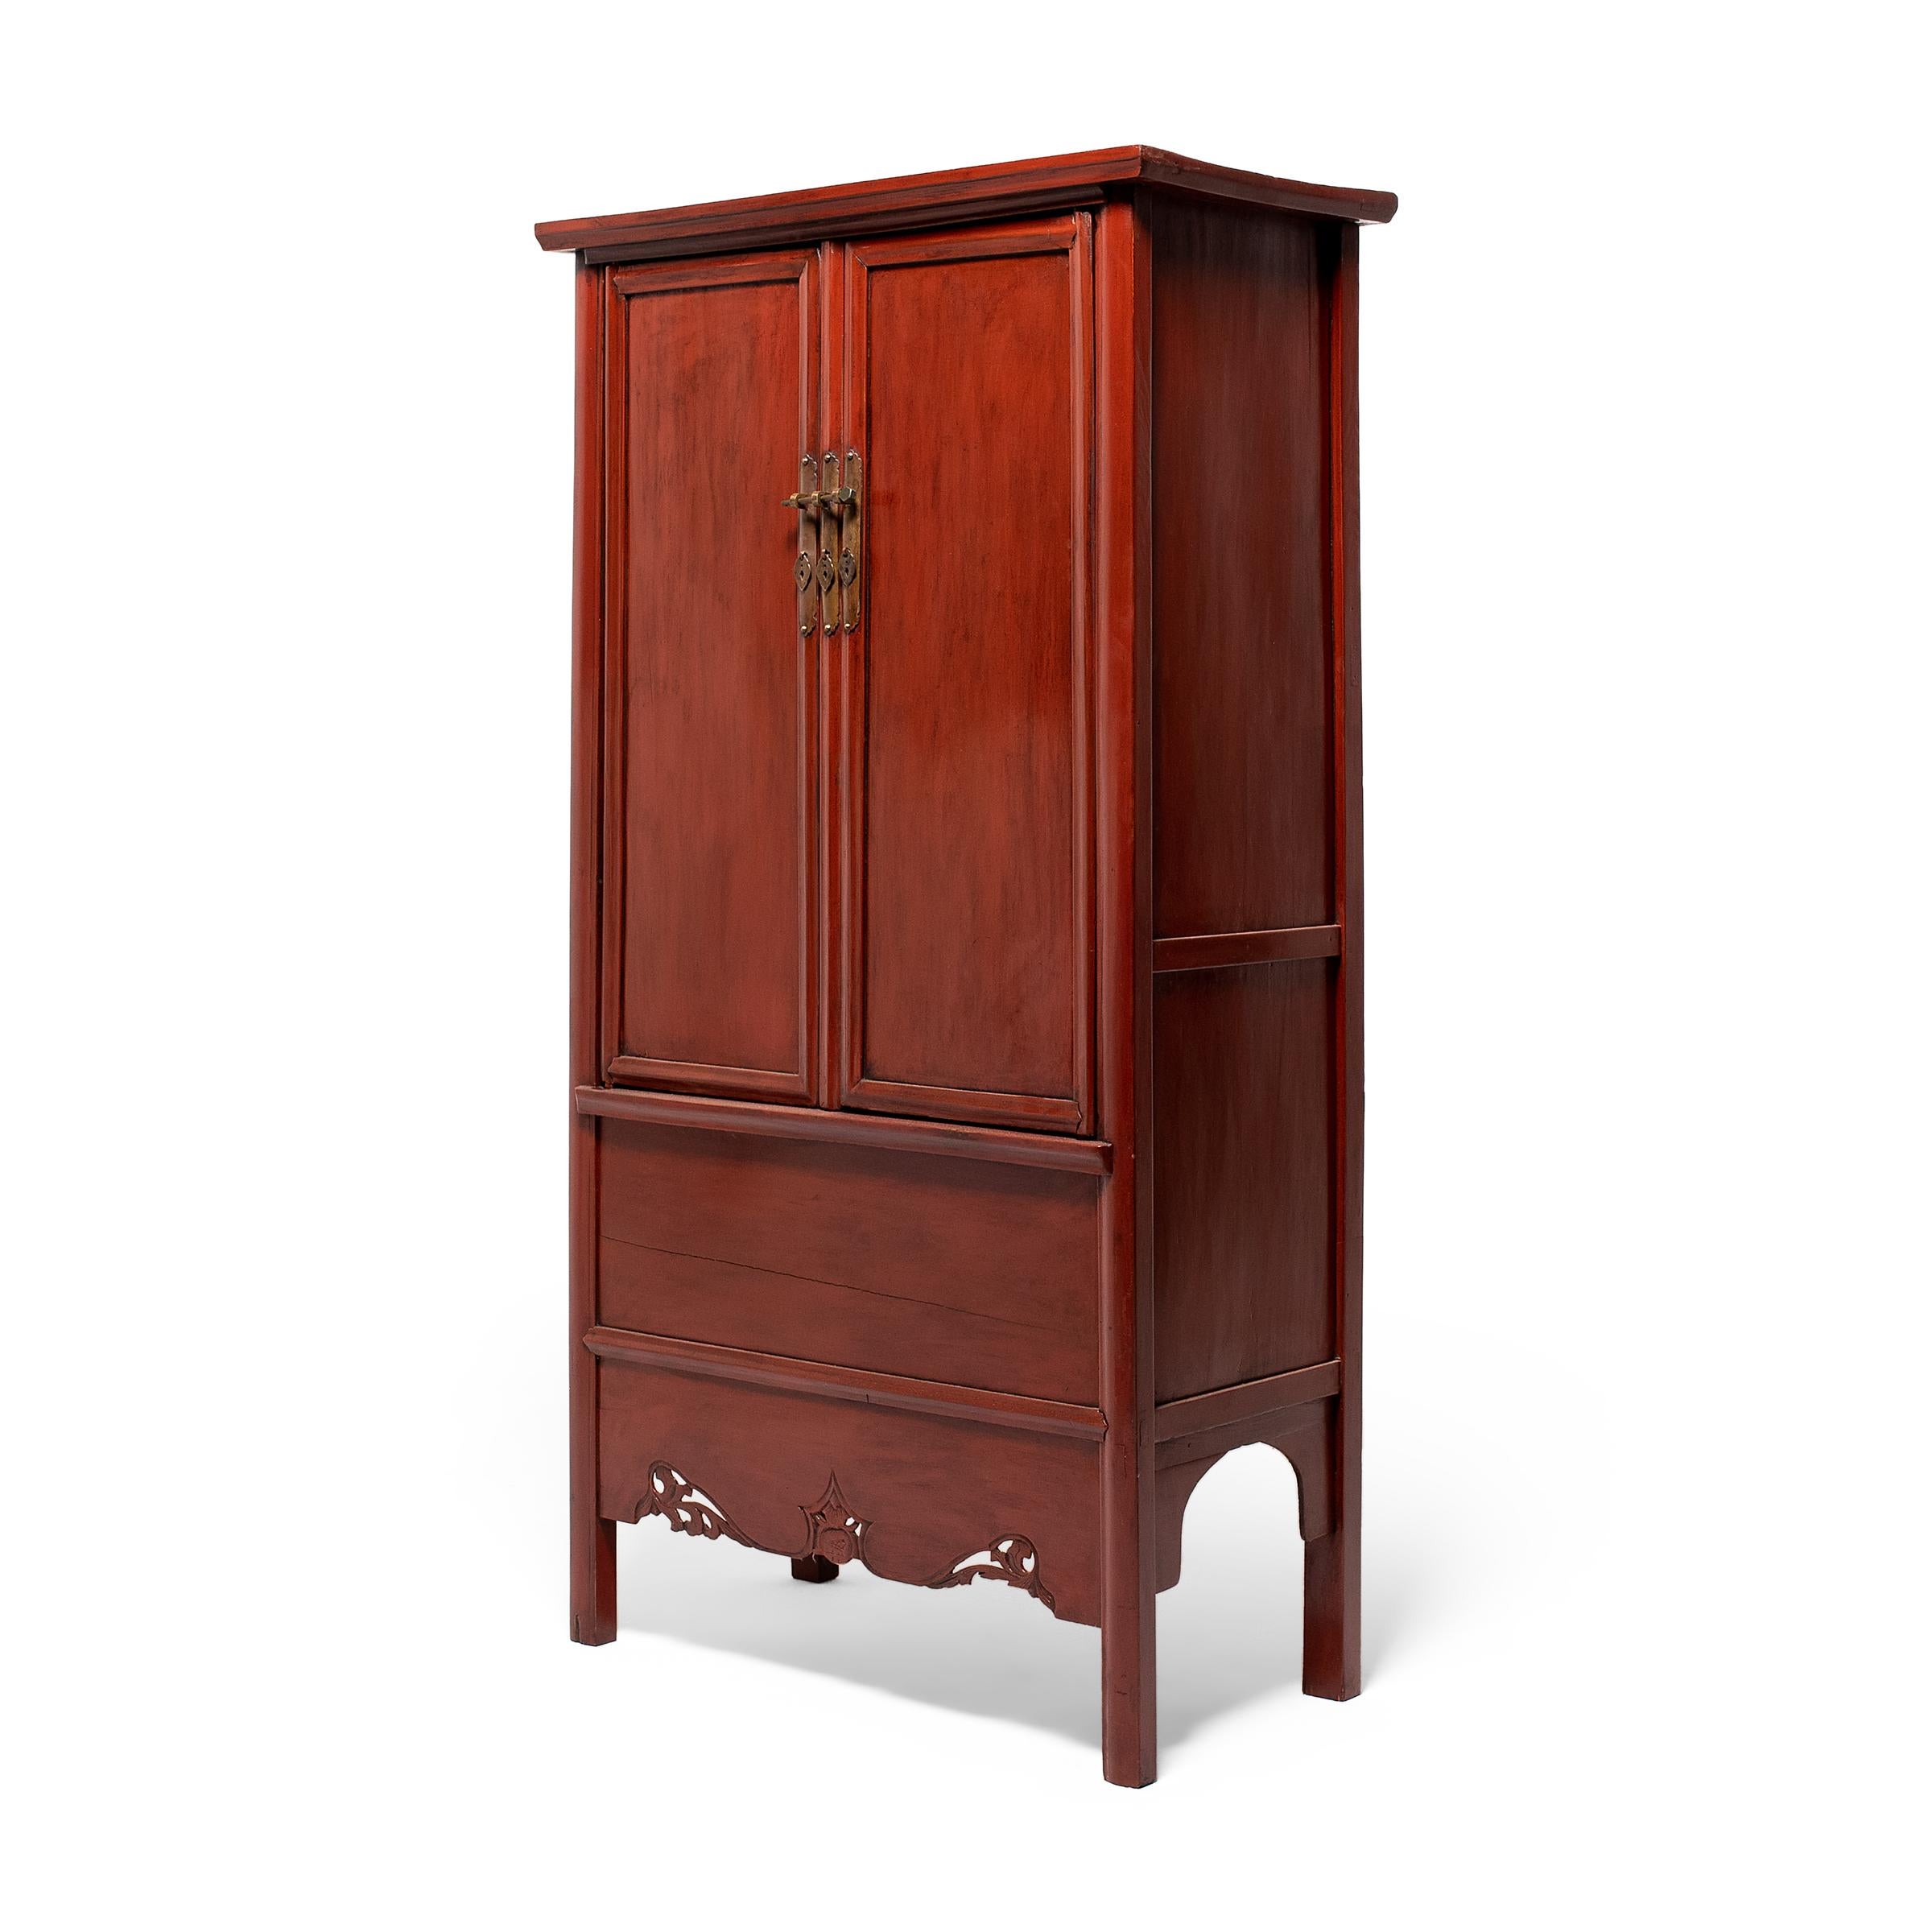 A classic piece of Chinese furniture, large, upright cabinets such as this were used in traditional homes in lieu of built-in closets, filled with clothing, bedding, and other household goods. Dated to the 19th century, this example is crafted in